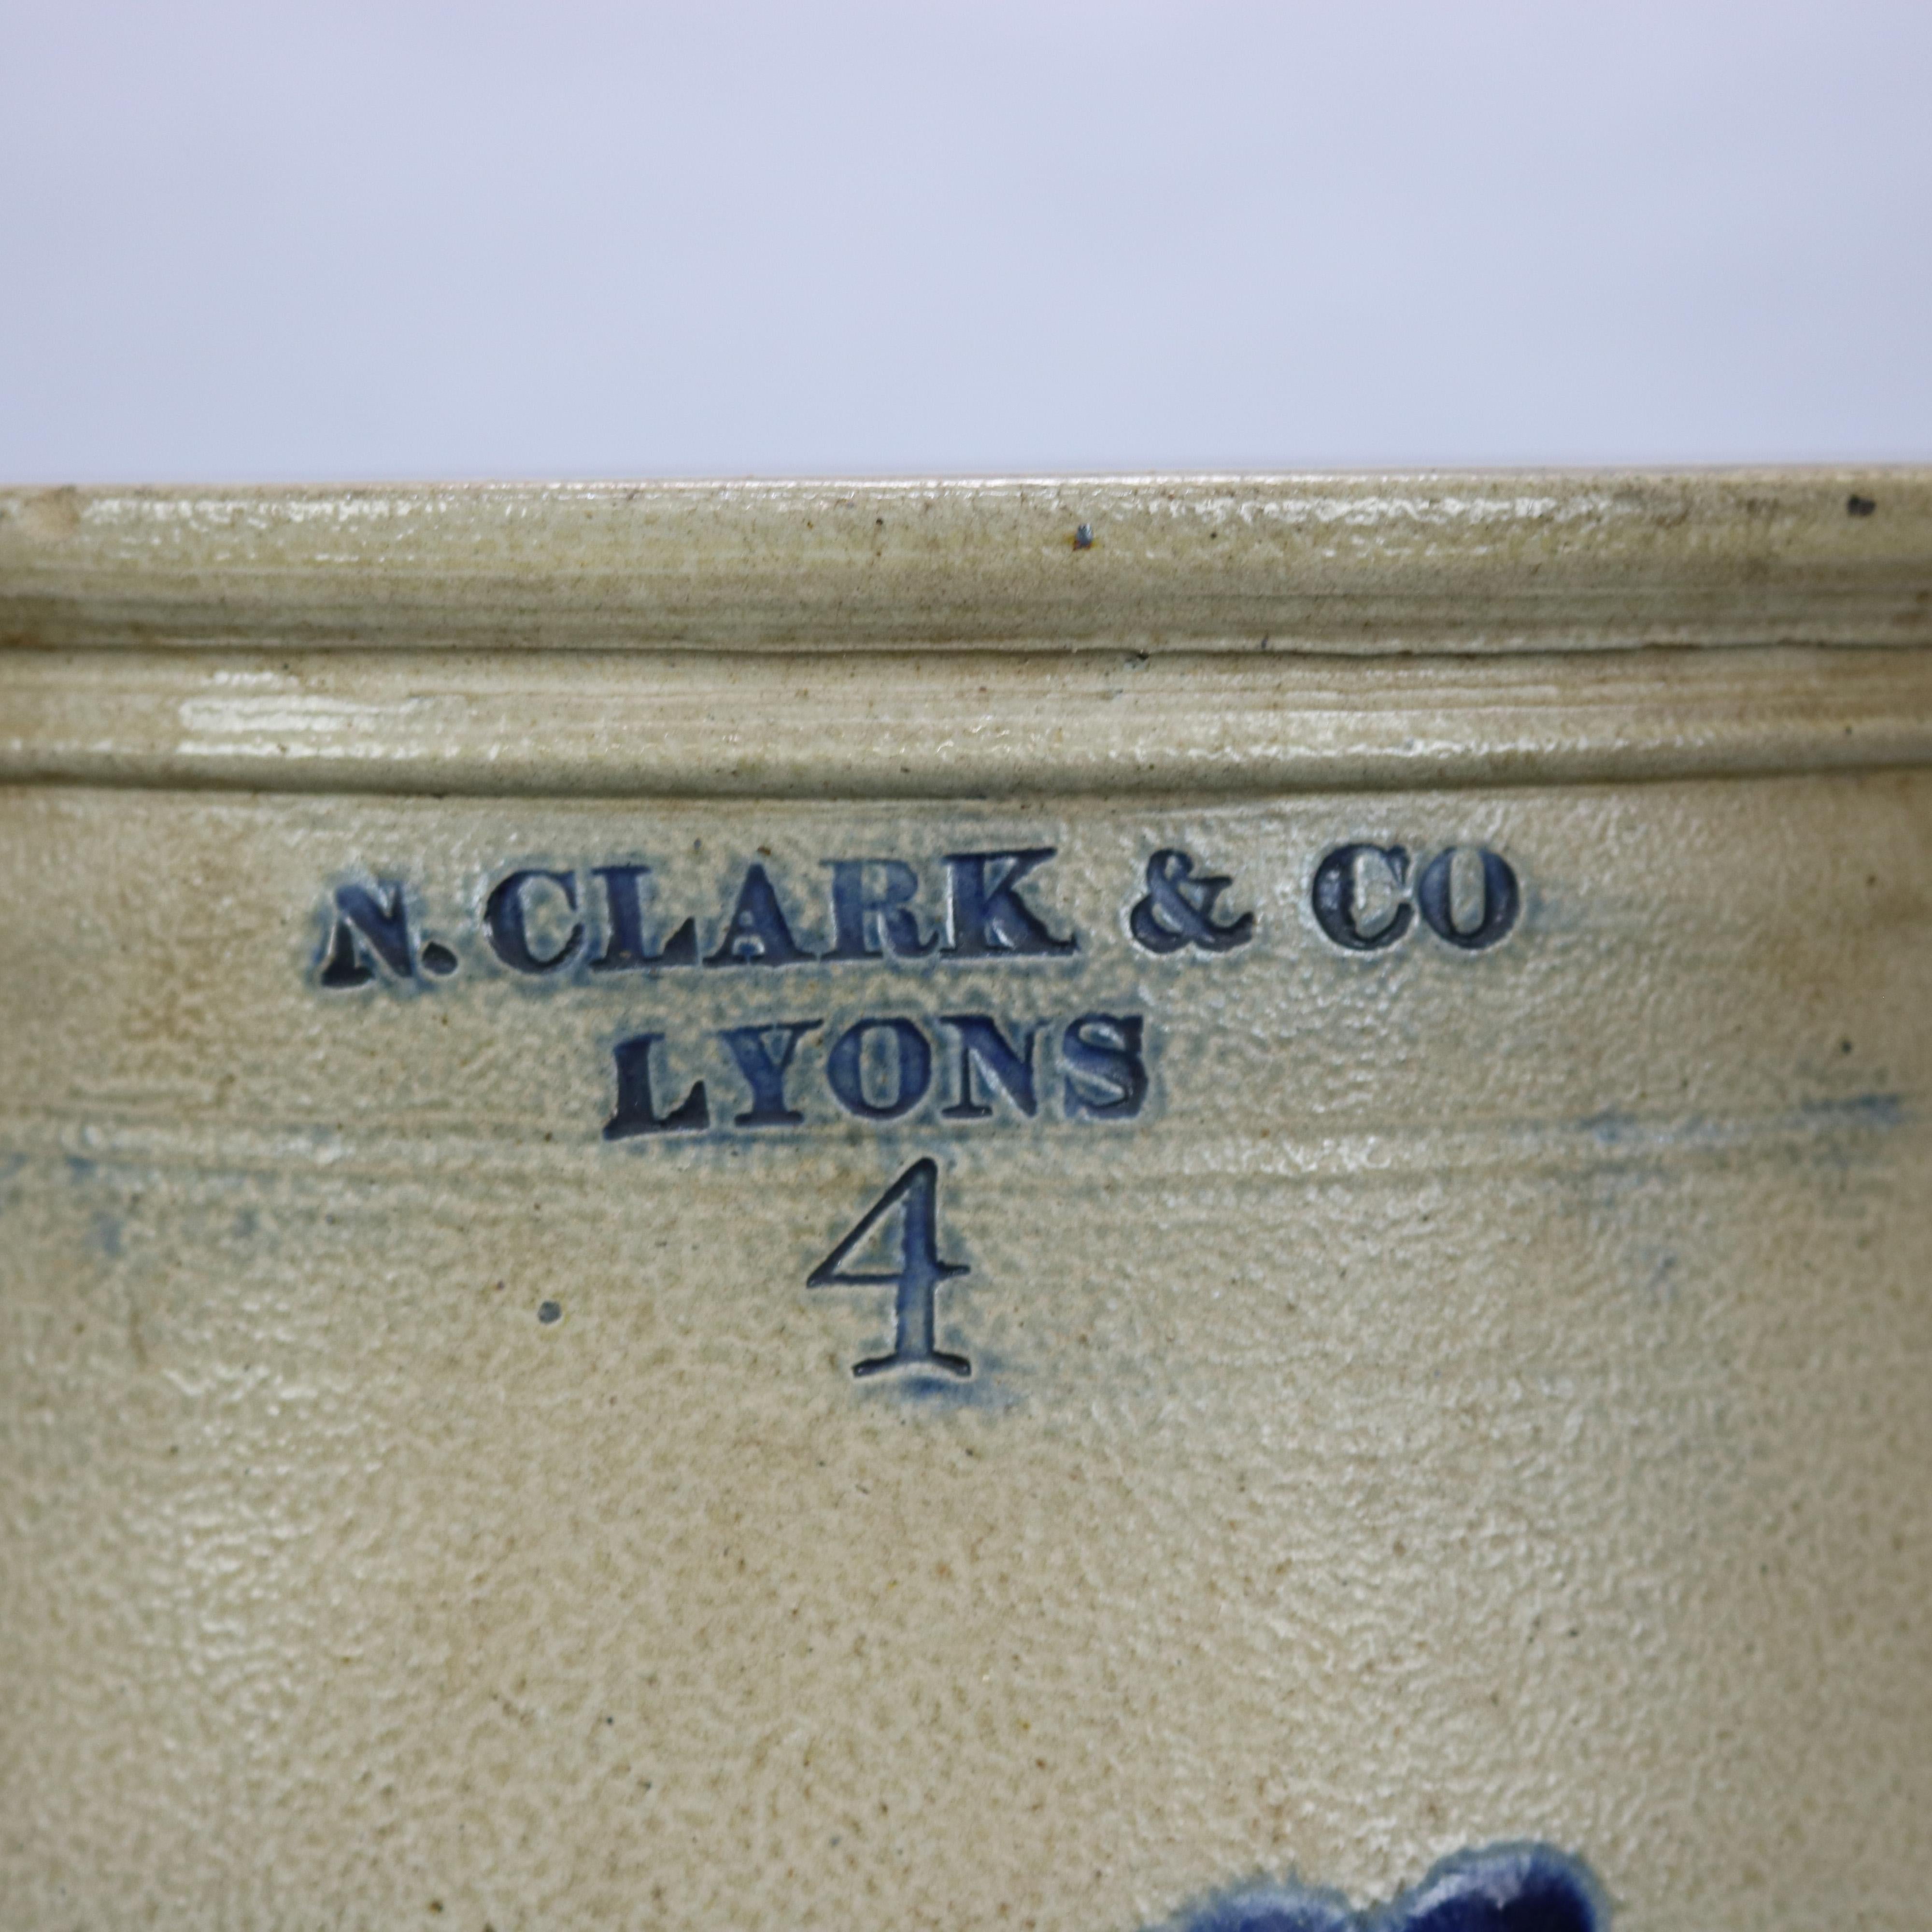 An antique stoneware crock by Clark & Co, Lyons offers four gallon double handle salt glazed vessel with blue foliate decoration and maker stamped as photographed, 19th century

Measures: 12.75